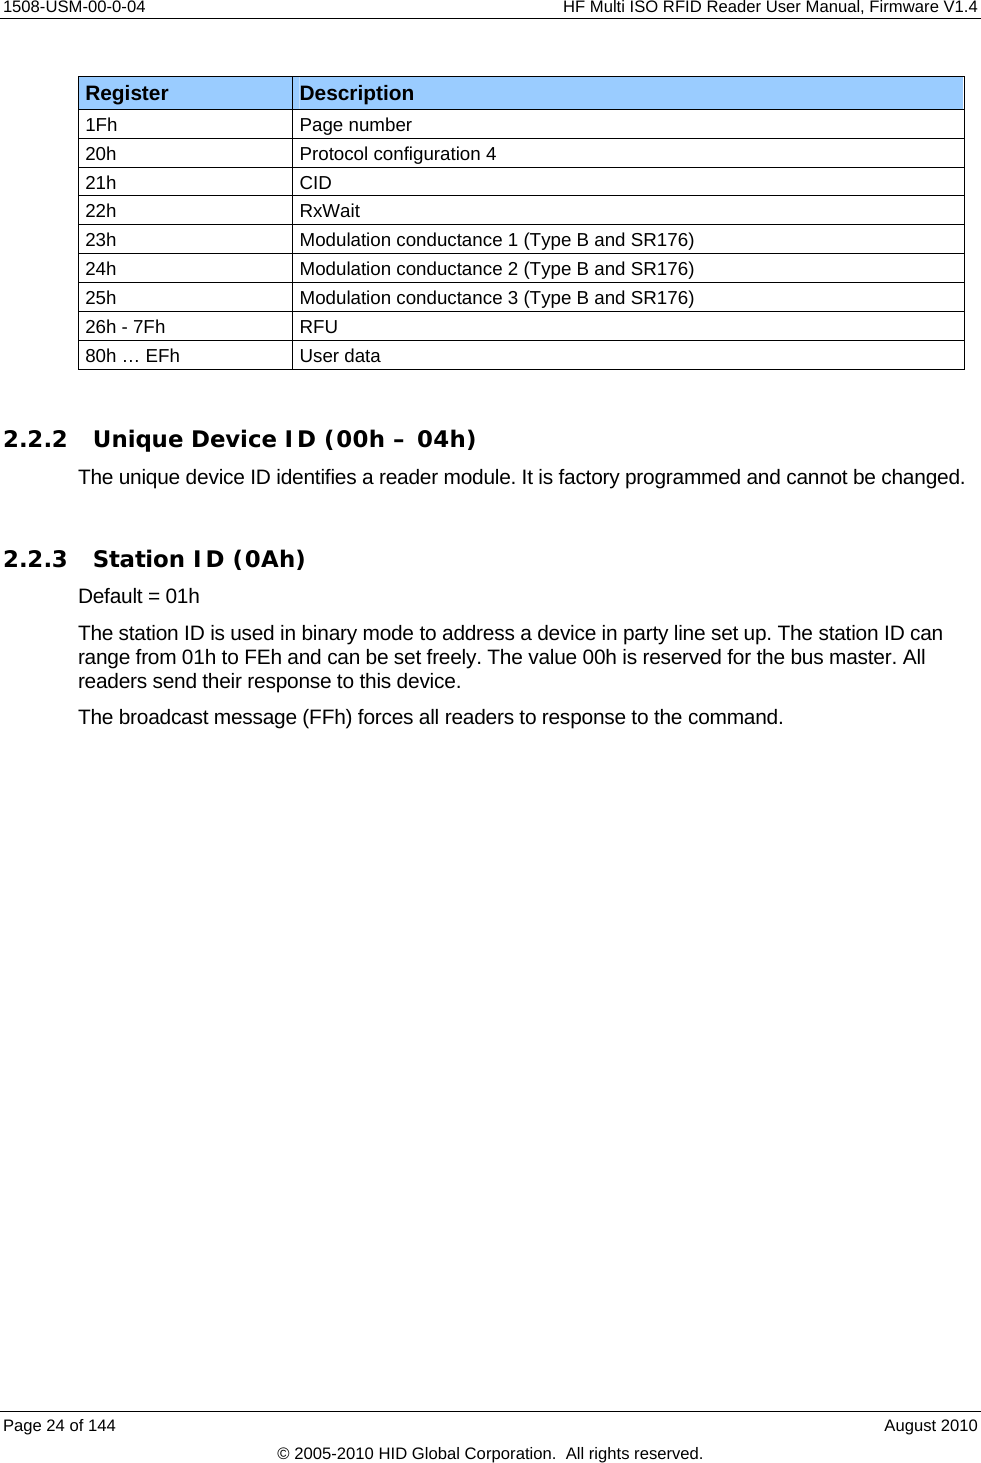     1508-USM-00-0-04    HF Multi ISO RFID Reader User Manual, Firmware V1.4 Page 24 of 144    August 2010 © 2005-2010 HID Global Corporation.  All rights reserved. Register  Description 1Fh Page number 20h  Protocol configuration 4 21h CID 22h RxWait 23h  Modulation conductance 1 (Type B and SR176) 24h  Modulation conductance 2 (Type B and SR176) 25h  Modulation conductance 3 (Type B and SR176) 26h - 7Fh  RFU 80h … EFh  User data  2.2.2 Unique Device ID (00h – 04h) The unique device ID identifies a reader module. It is factory programmed and cannot be changed.  2.2.3 Station ID (0Ah)  Default = 01h The station ID is used in binary mode to address a device in party line set up. The station ID can range from 01h to FEh and can be set freely. The value 00h is reserved for the bus master. All readers send their response to this device. The broadcast message (FFh) forces all readers to response to the command.  